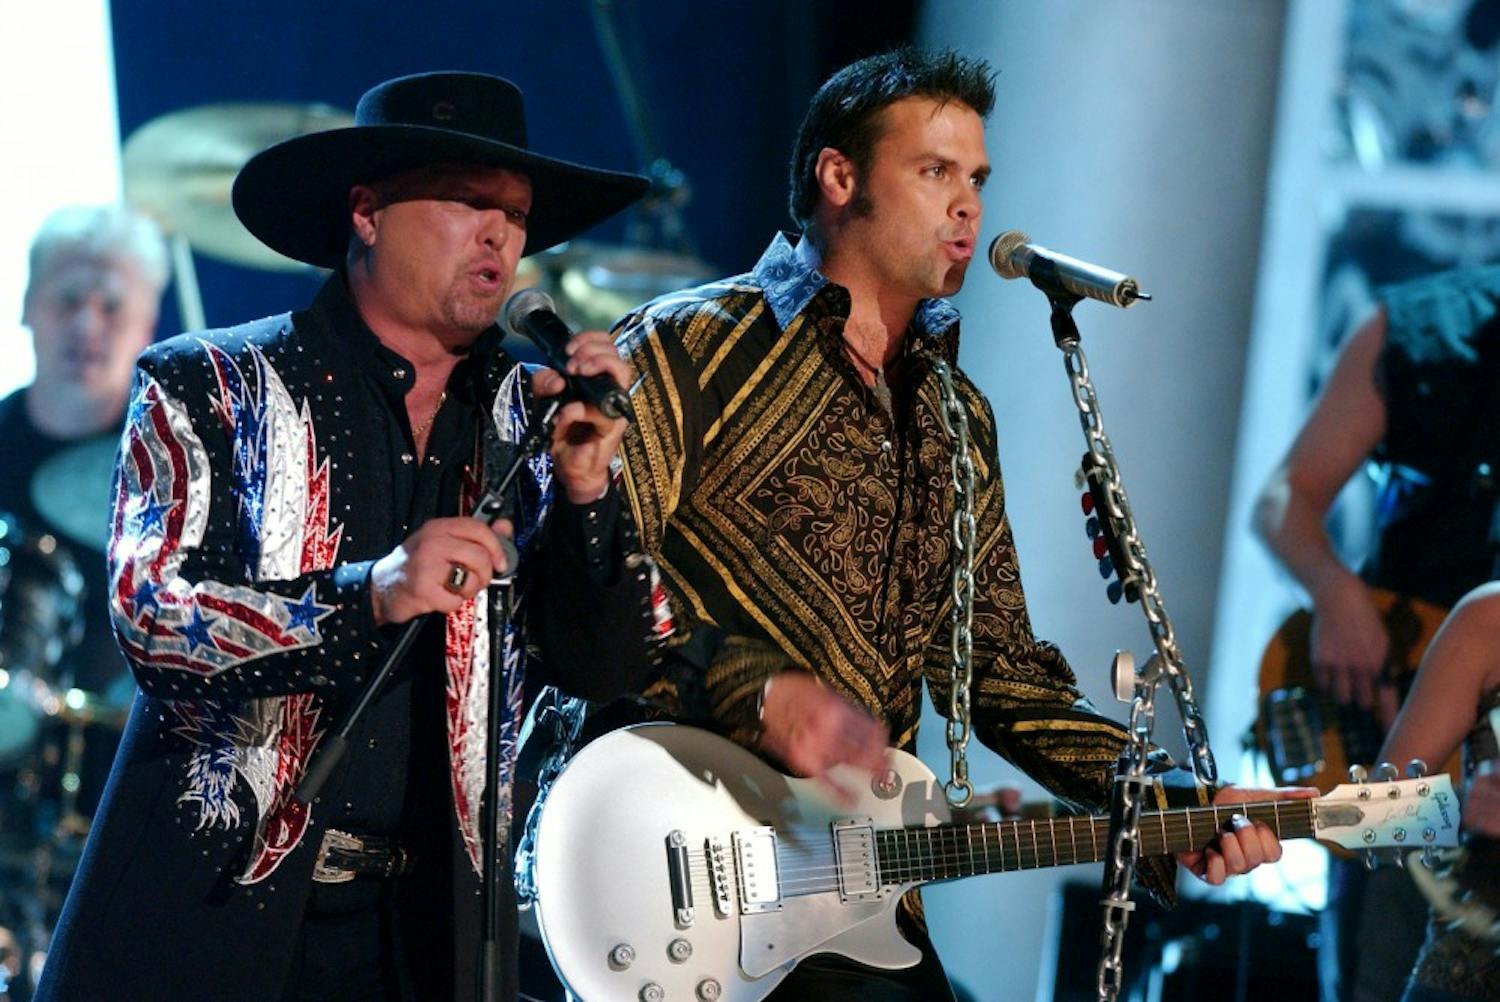 KRT ENTERTAINMENT STAND ALONE PHOTO SLUGGED: COUNTRYMUSICAWARDS KRT PHOTOGRAPH BY NICOLAS KHAYAT/ABACA PRESS (November 10) Montgomery Gentry perform during the 38th annual Country Music Awards, held at the Grand Ole Opry in Nashville, Tennessee, on Tuesday, November 9, 2004. (lde) 2004